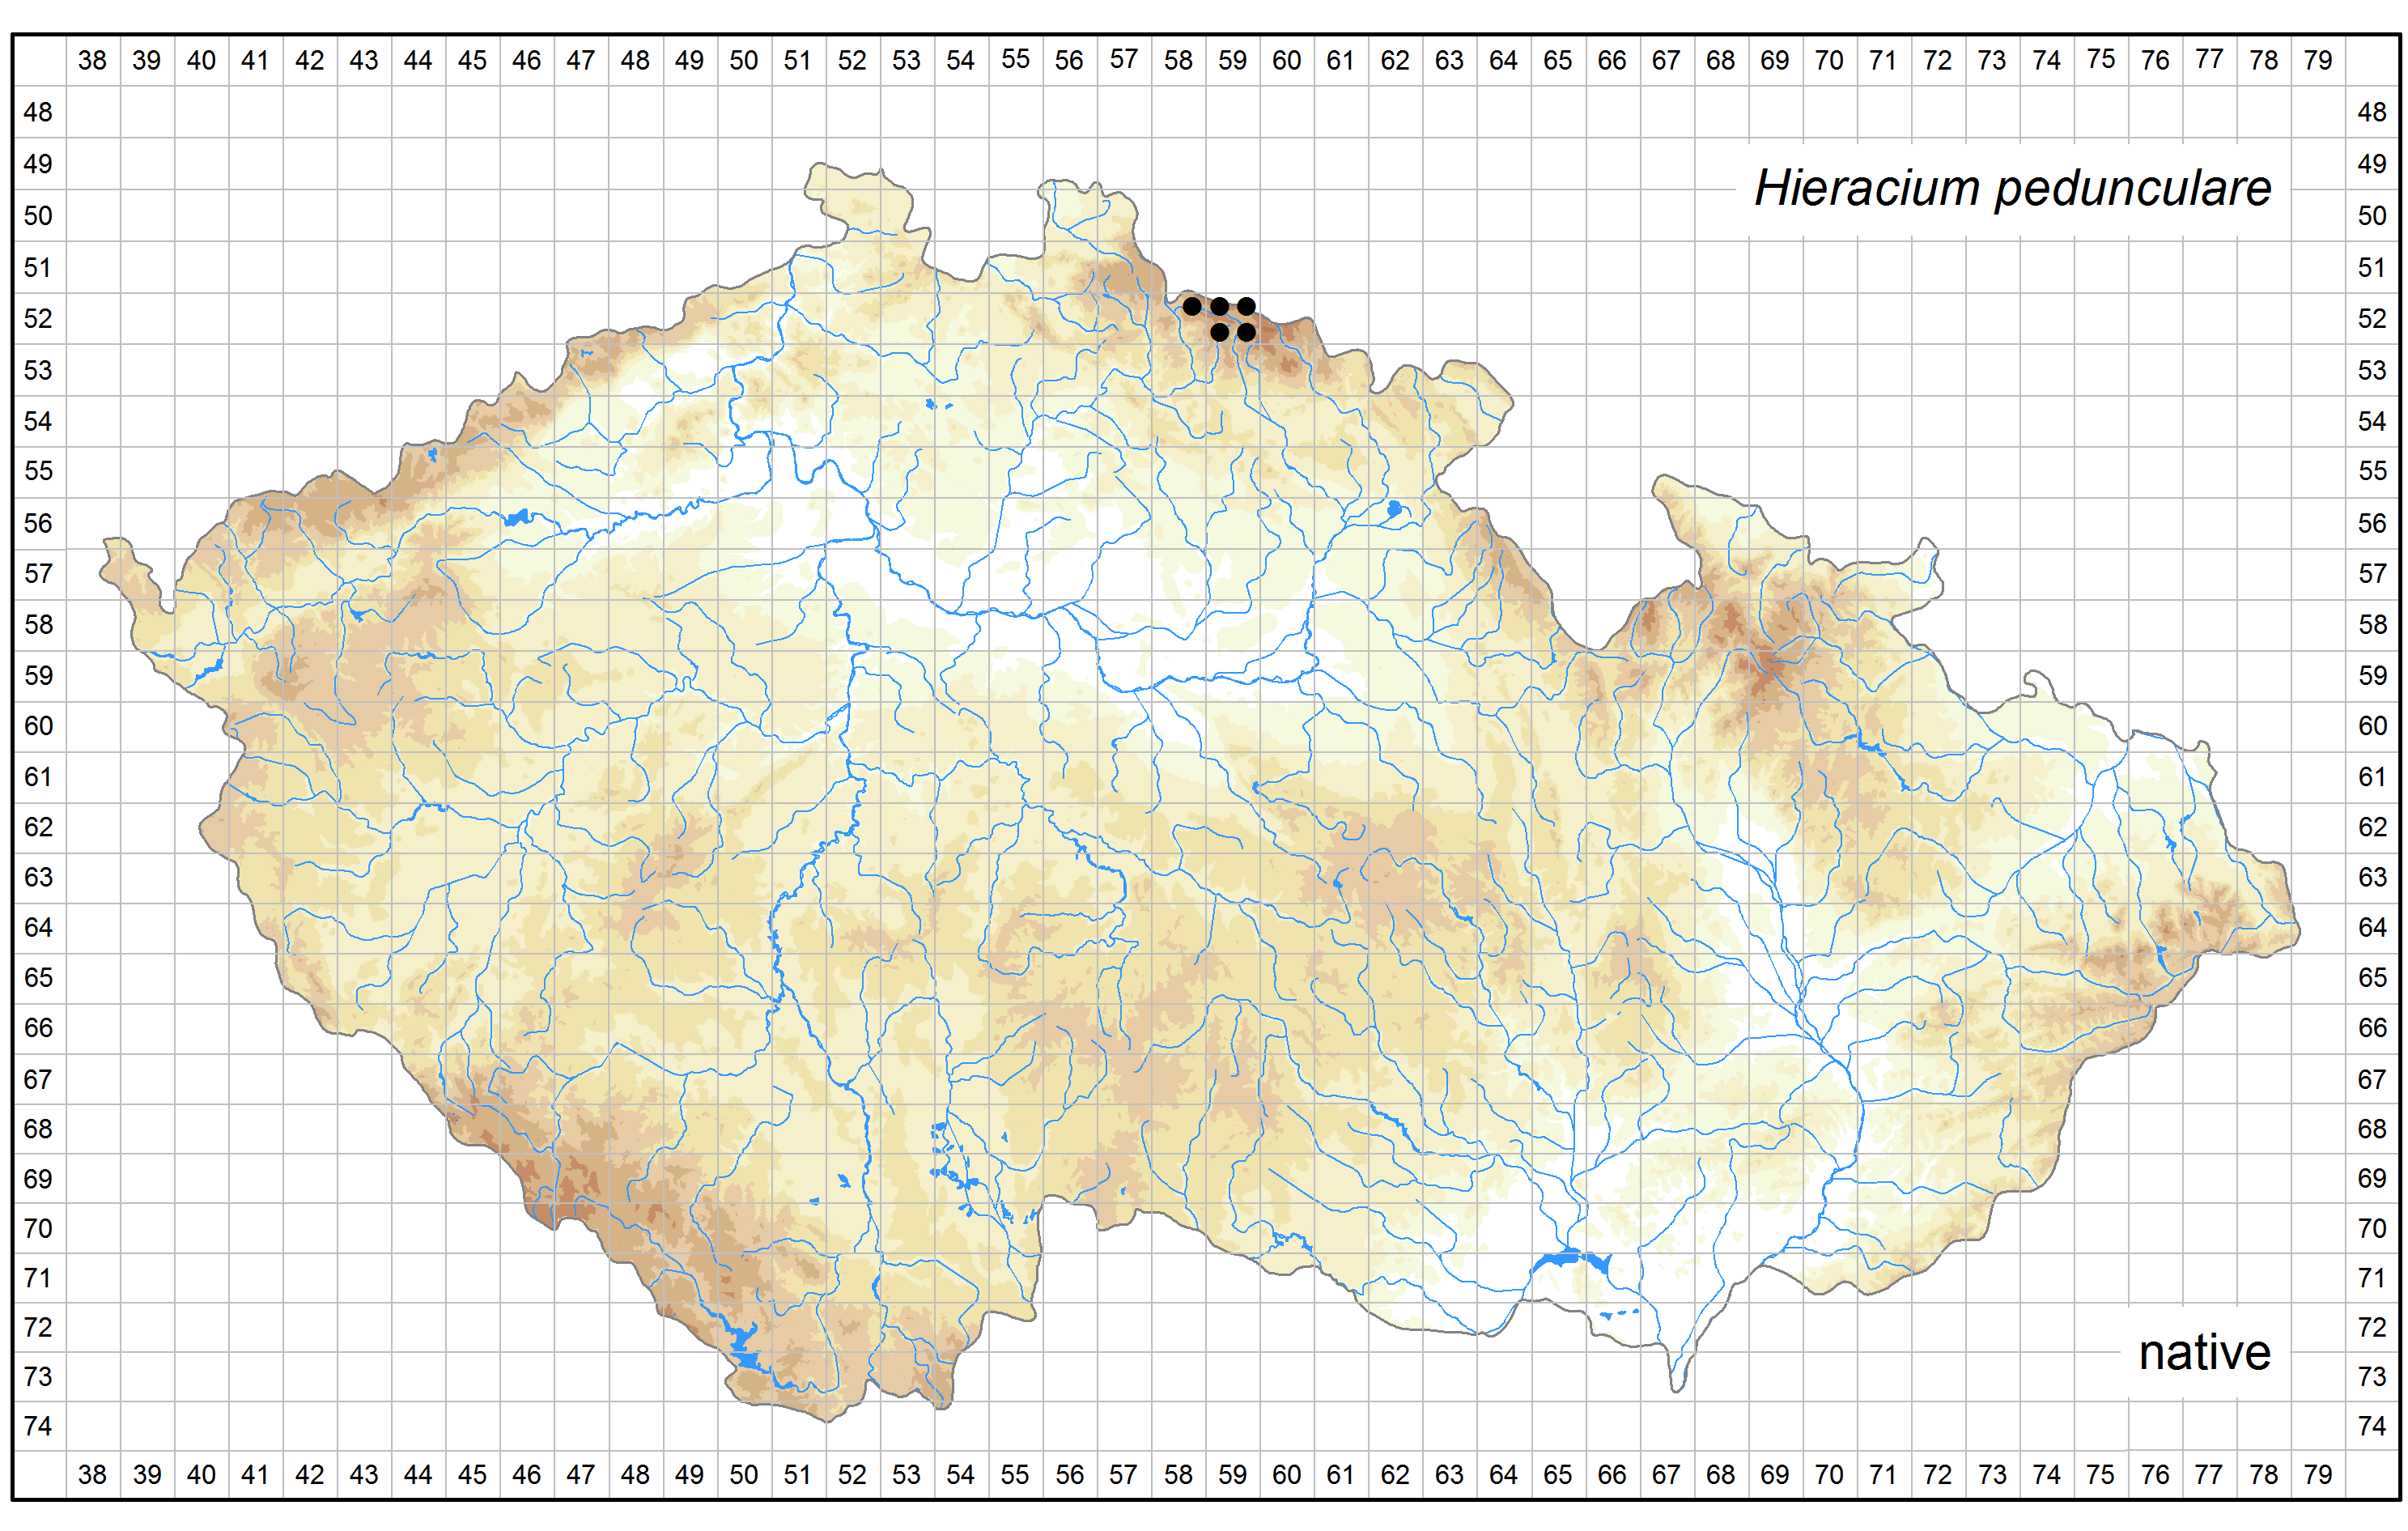 Distribution of Hieracium pedunculare in the Czech Republic Author of the map: Jindřich Chrtek Map produced on: 11-11-2016 Database records used for producing the distribution map of Hieracium